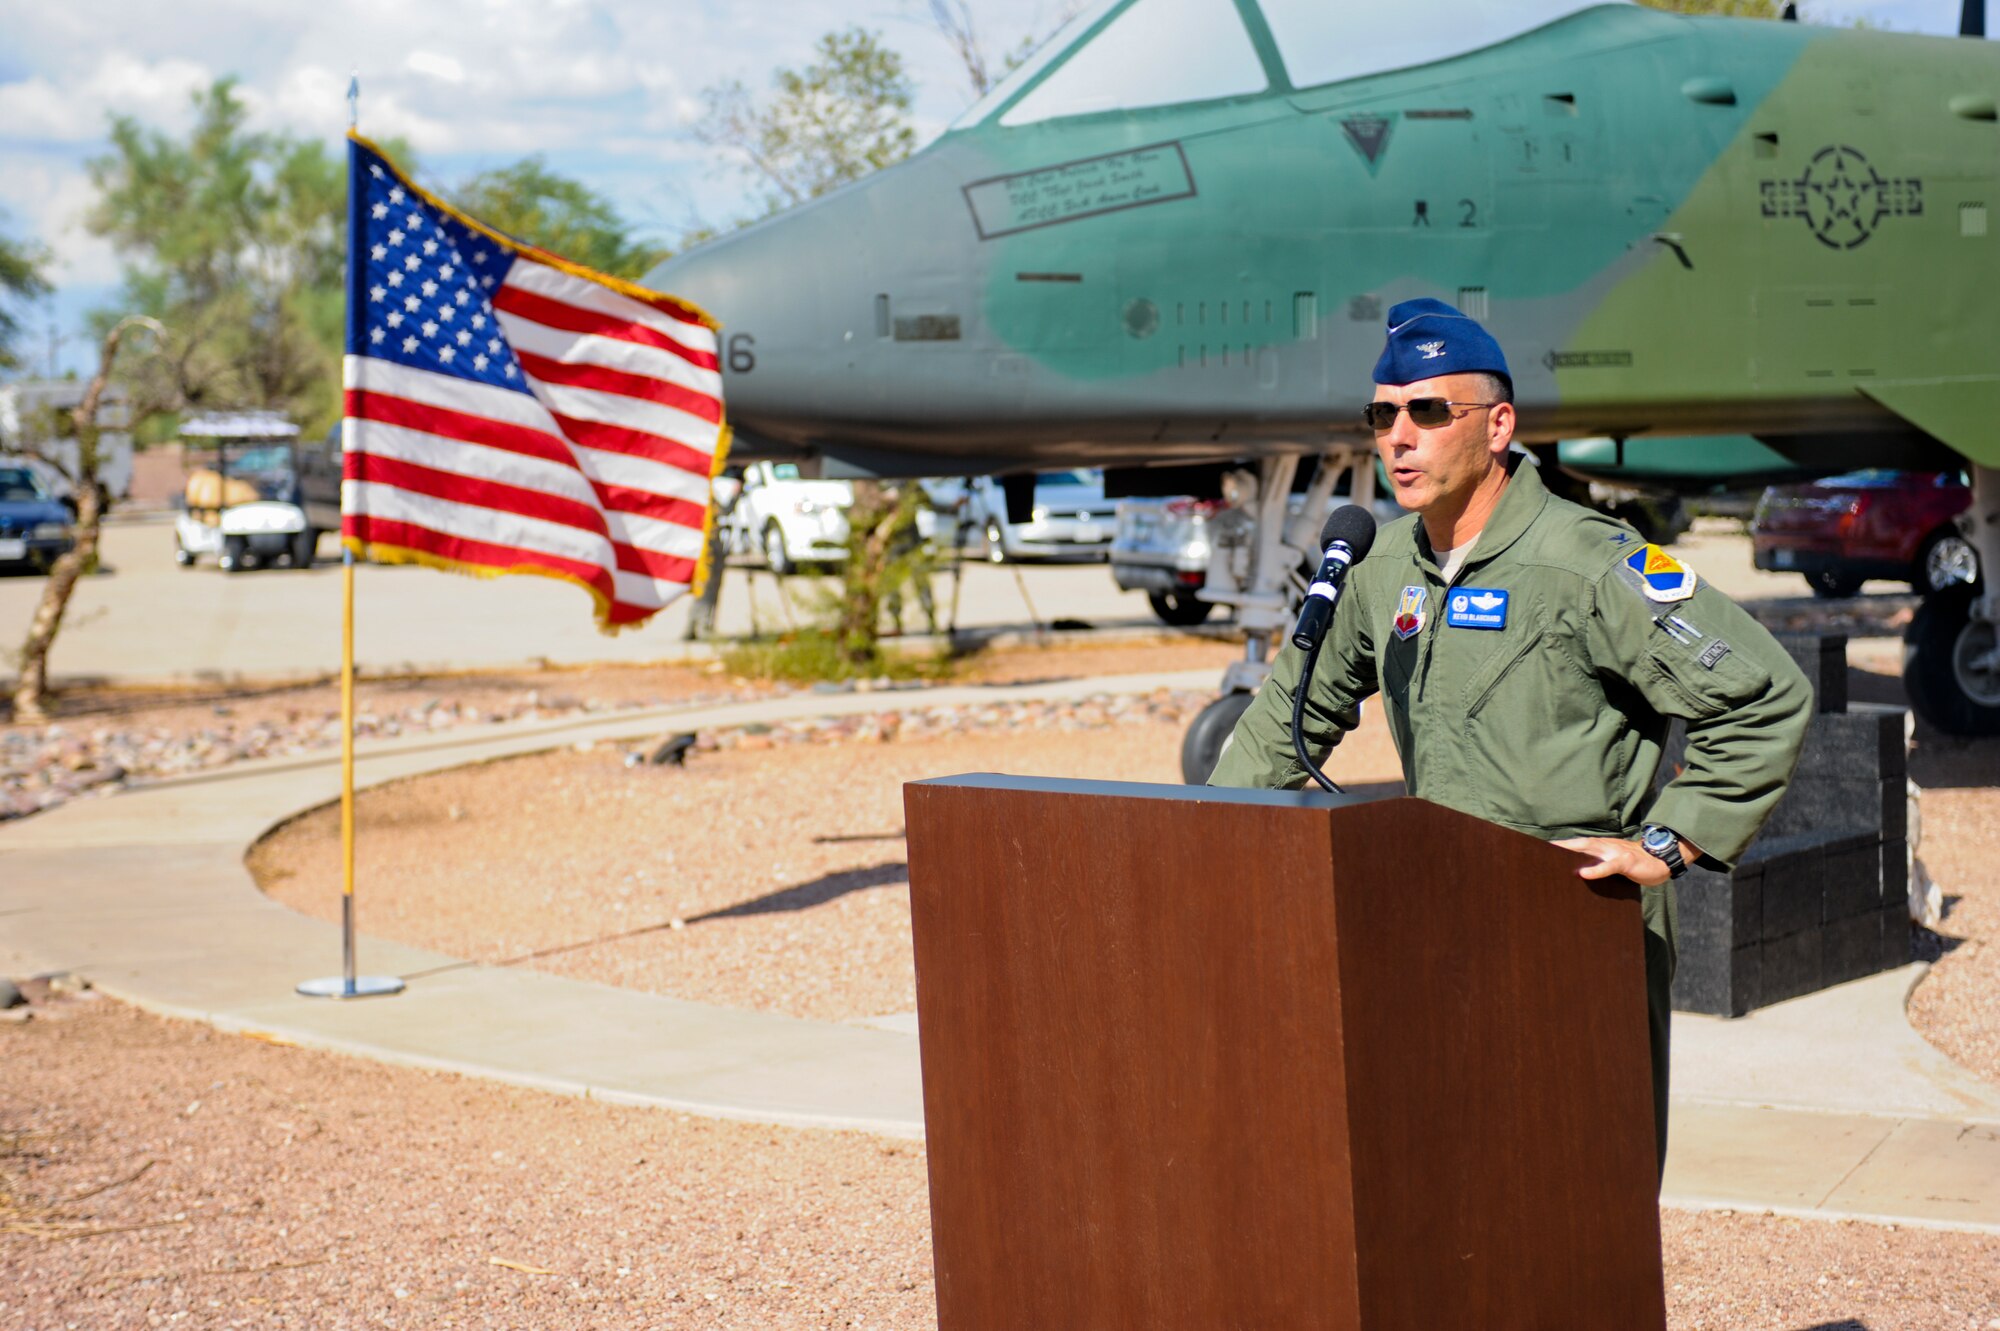 U.S. Air Force Col. Kevin Blanchard, 355th Fighter Wing commander, gives opening remarks during the opening ceremony of the 2014 Hawgsmoke Competition at Davis-Monthan Air Force Base, Ariz., July 9, 2014. As with tradition, since D-M won the last competition, the Desert Lightning Team is given the honor of hosting this year’s competition. (U.S. Air Force photo by Airman 1st Class Sivan Veazie/Released)